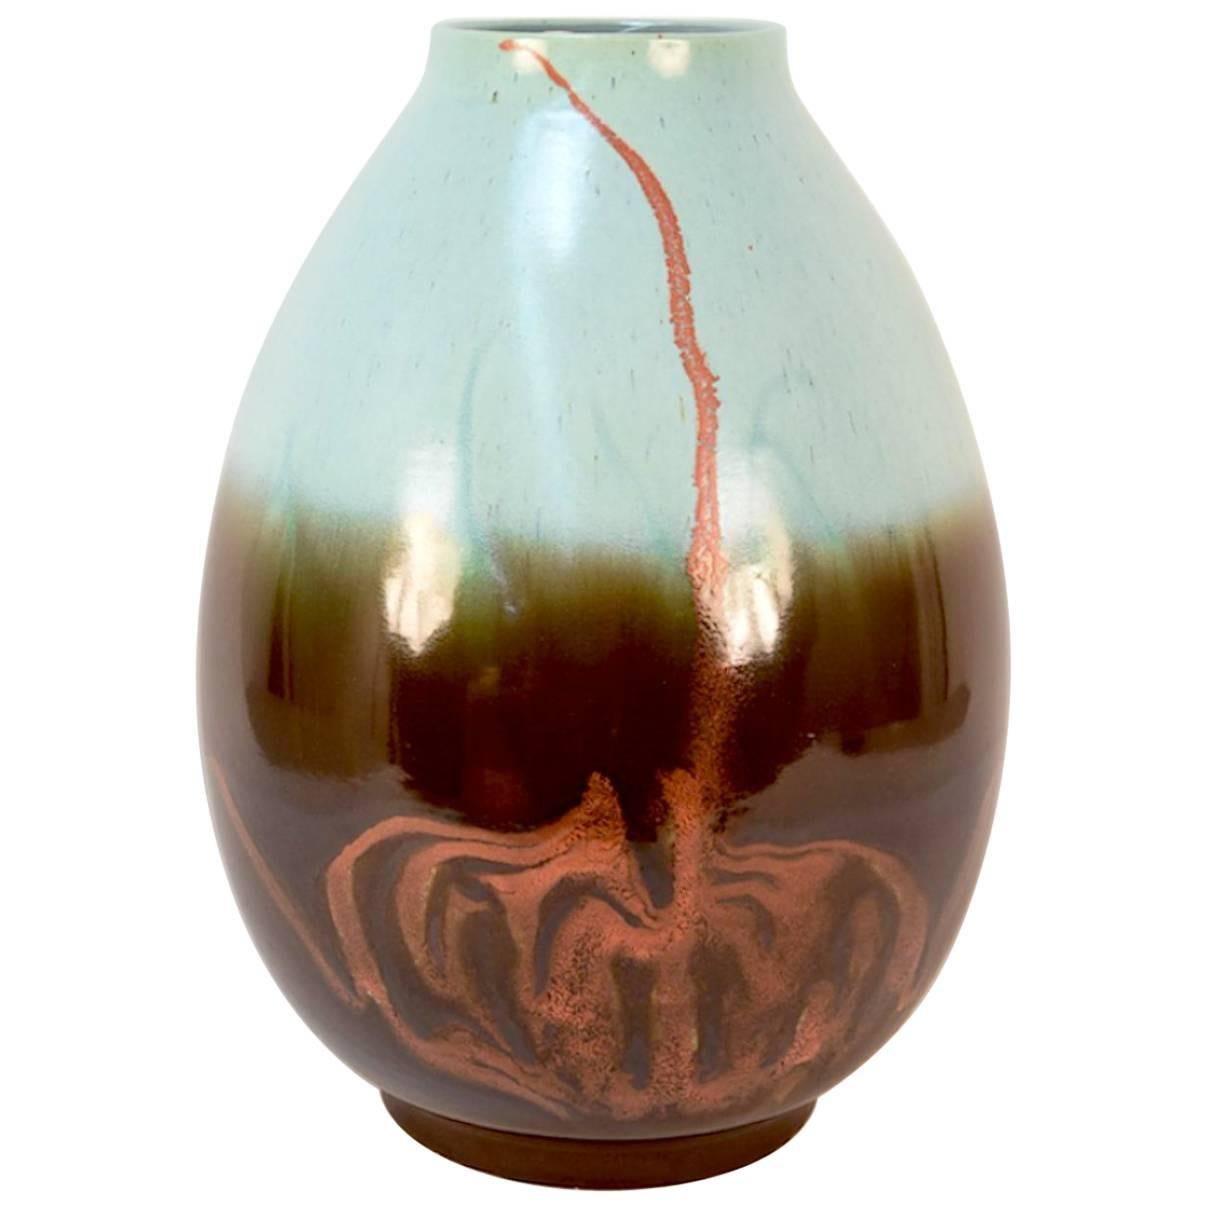 Rare and quite fabulous is this massive ceramic vase by Alvino Bagni, signed. This amazing Italian vase starts with Robin's egg blue and graduates to dark cocoa with a coral design that is definitely a statement piece!  The back of the vase also has